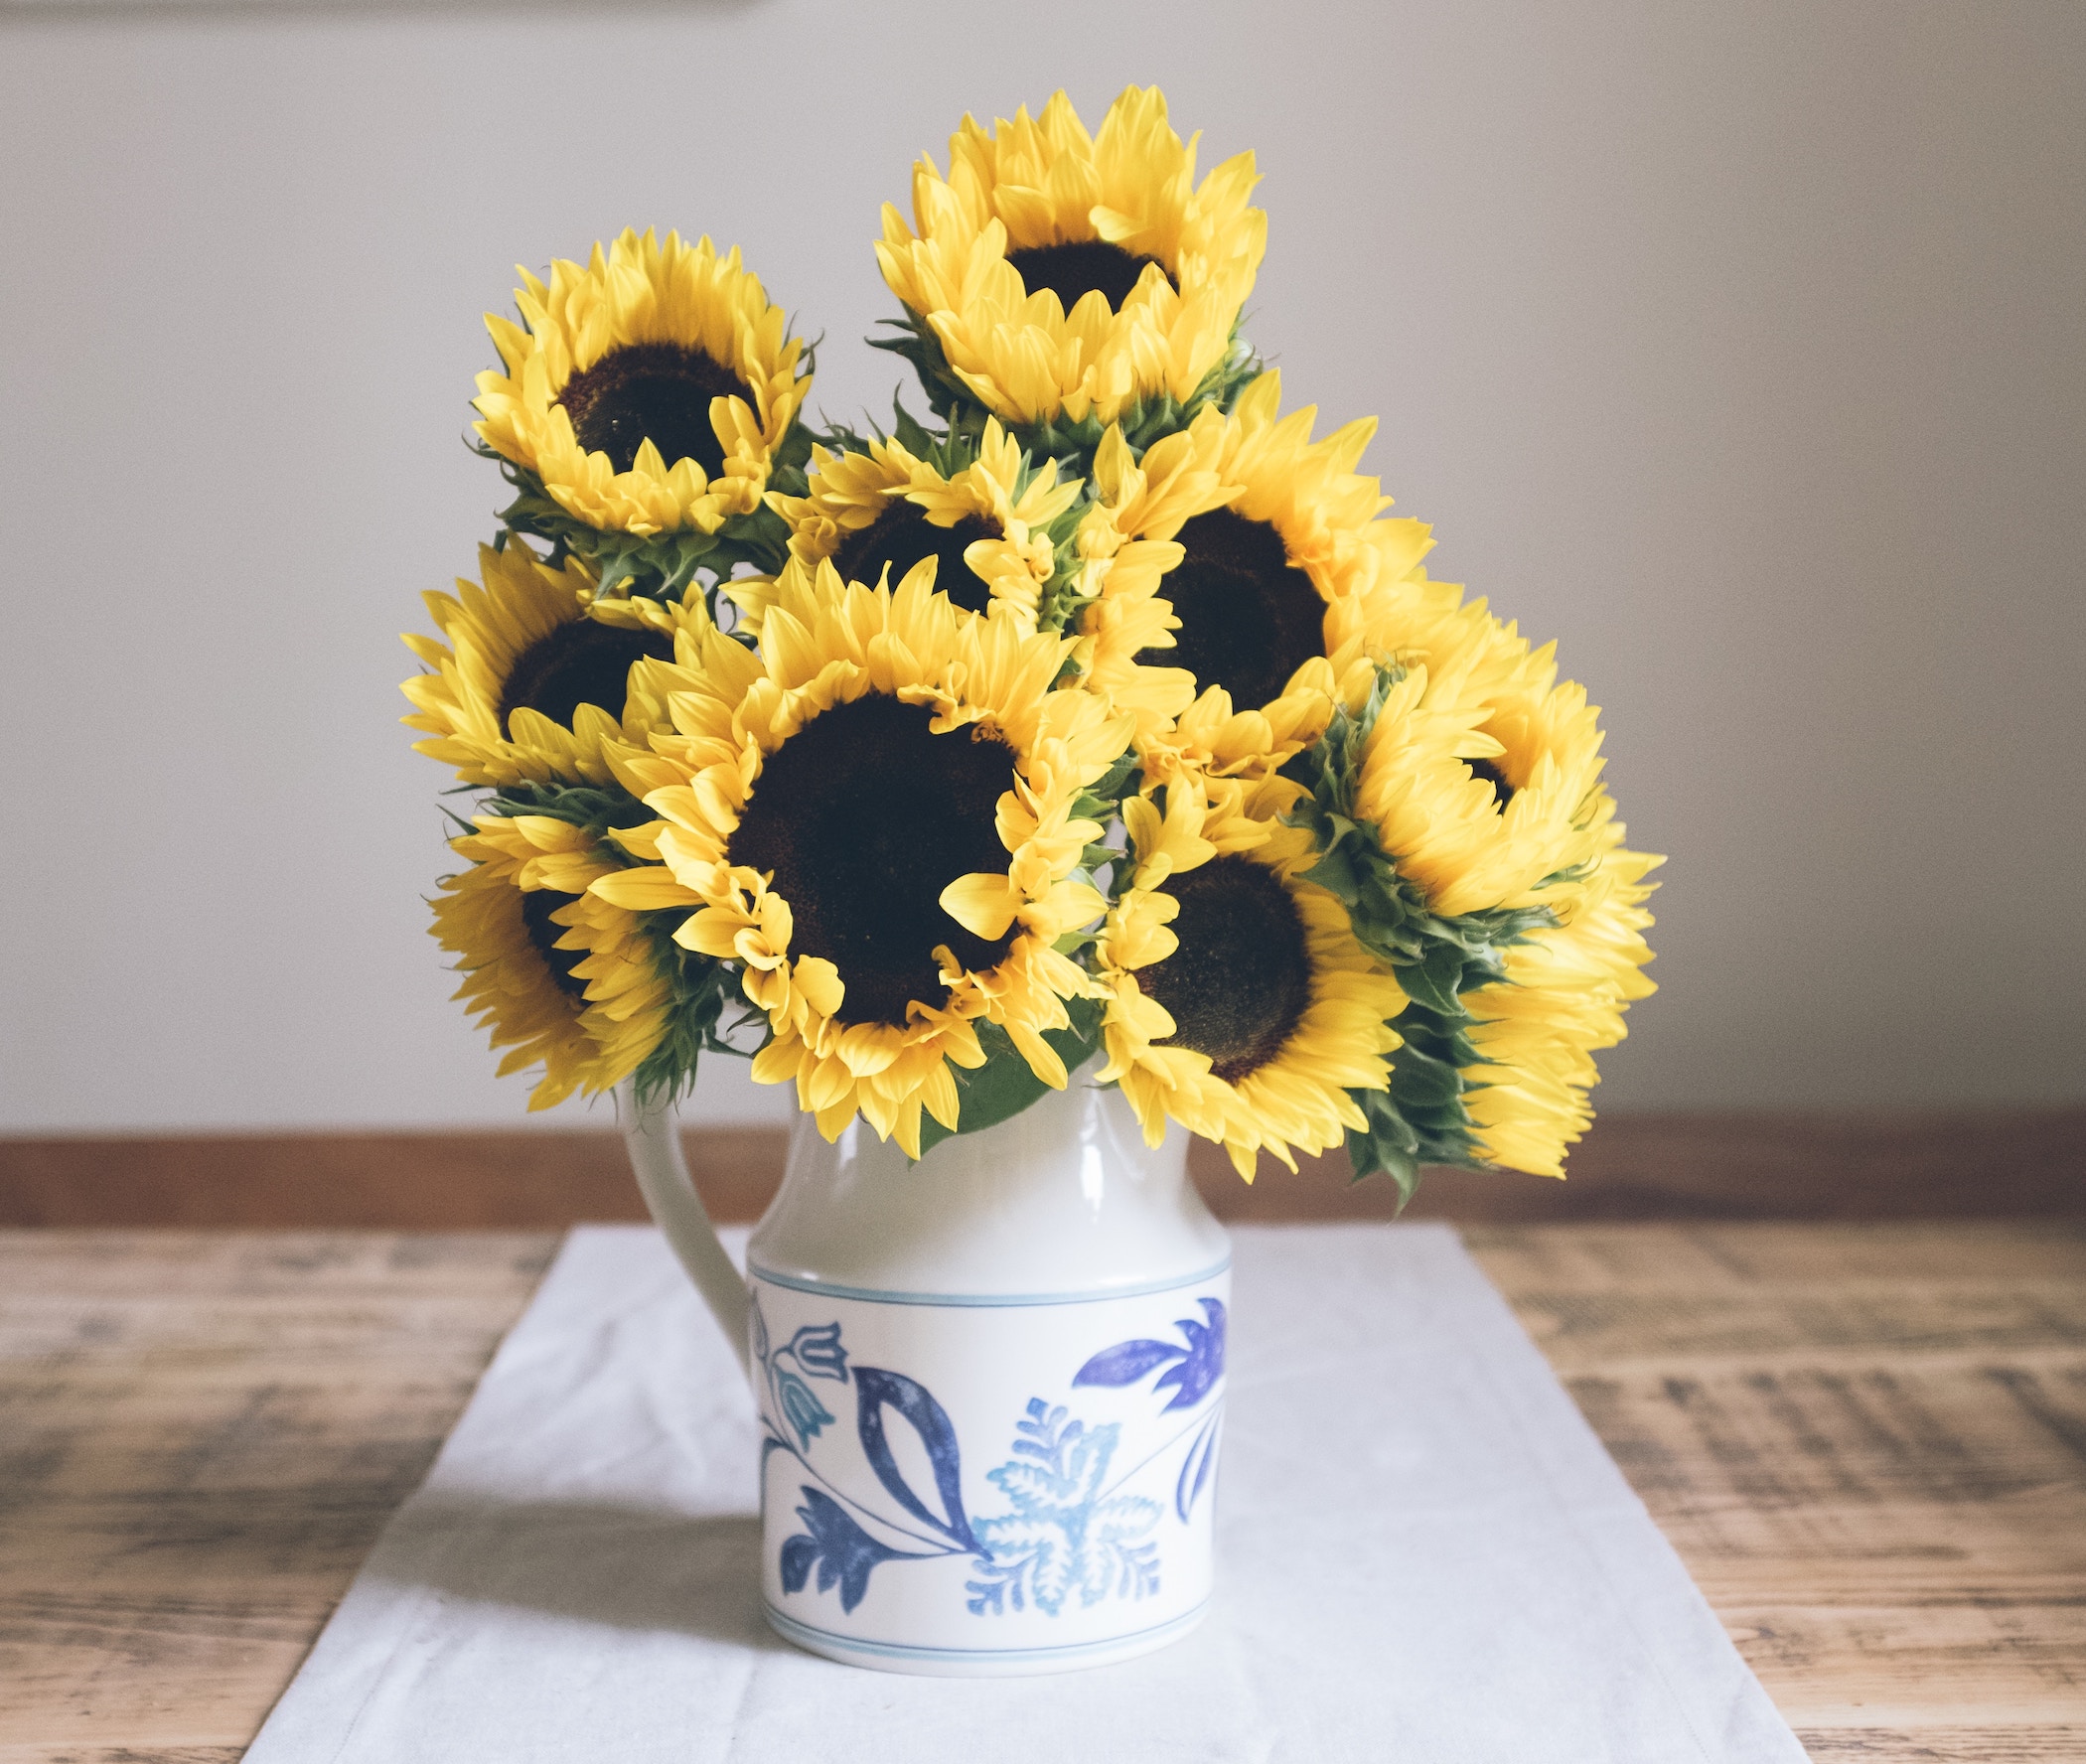 Sunflowers on a dining table in a home